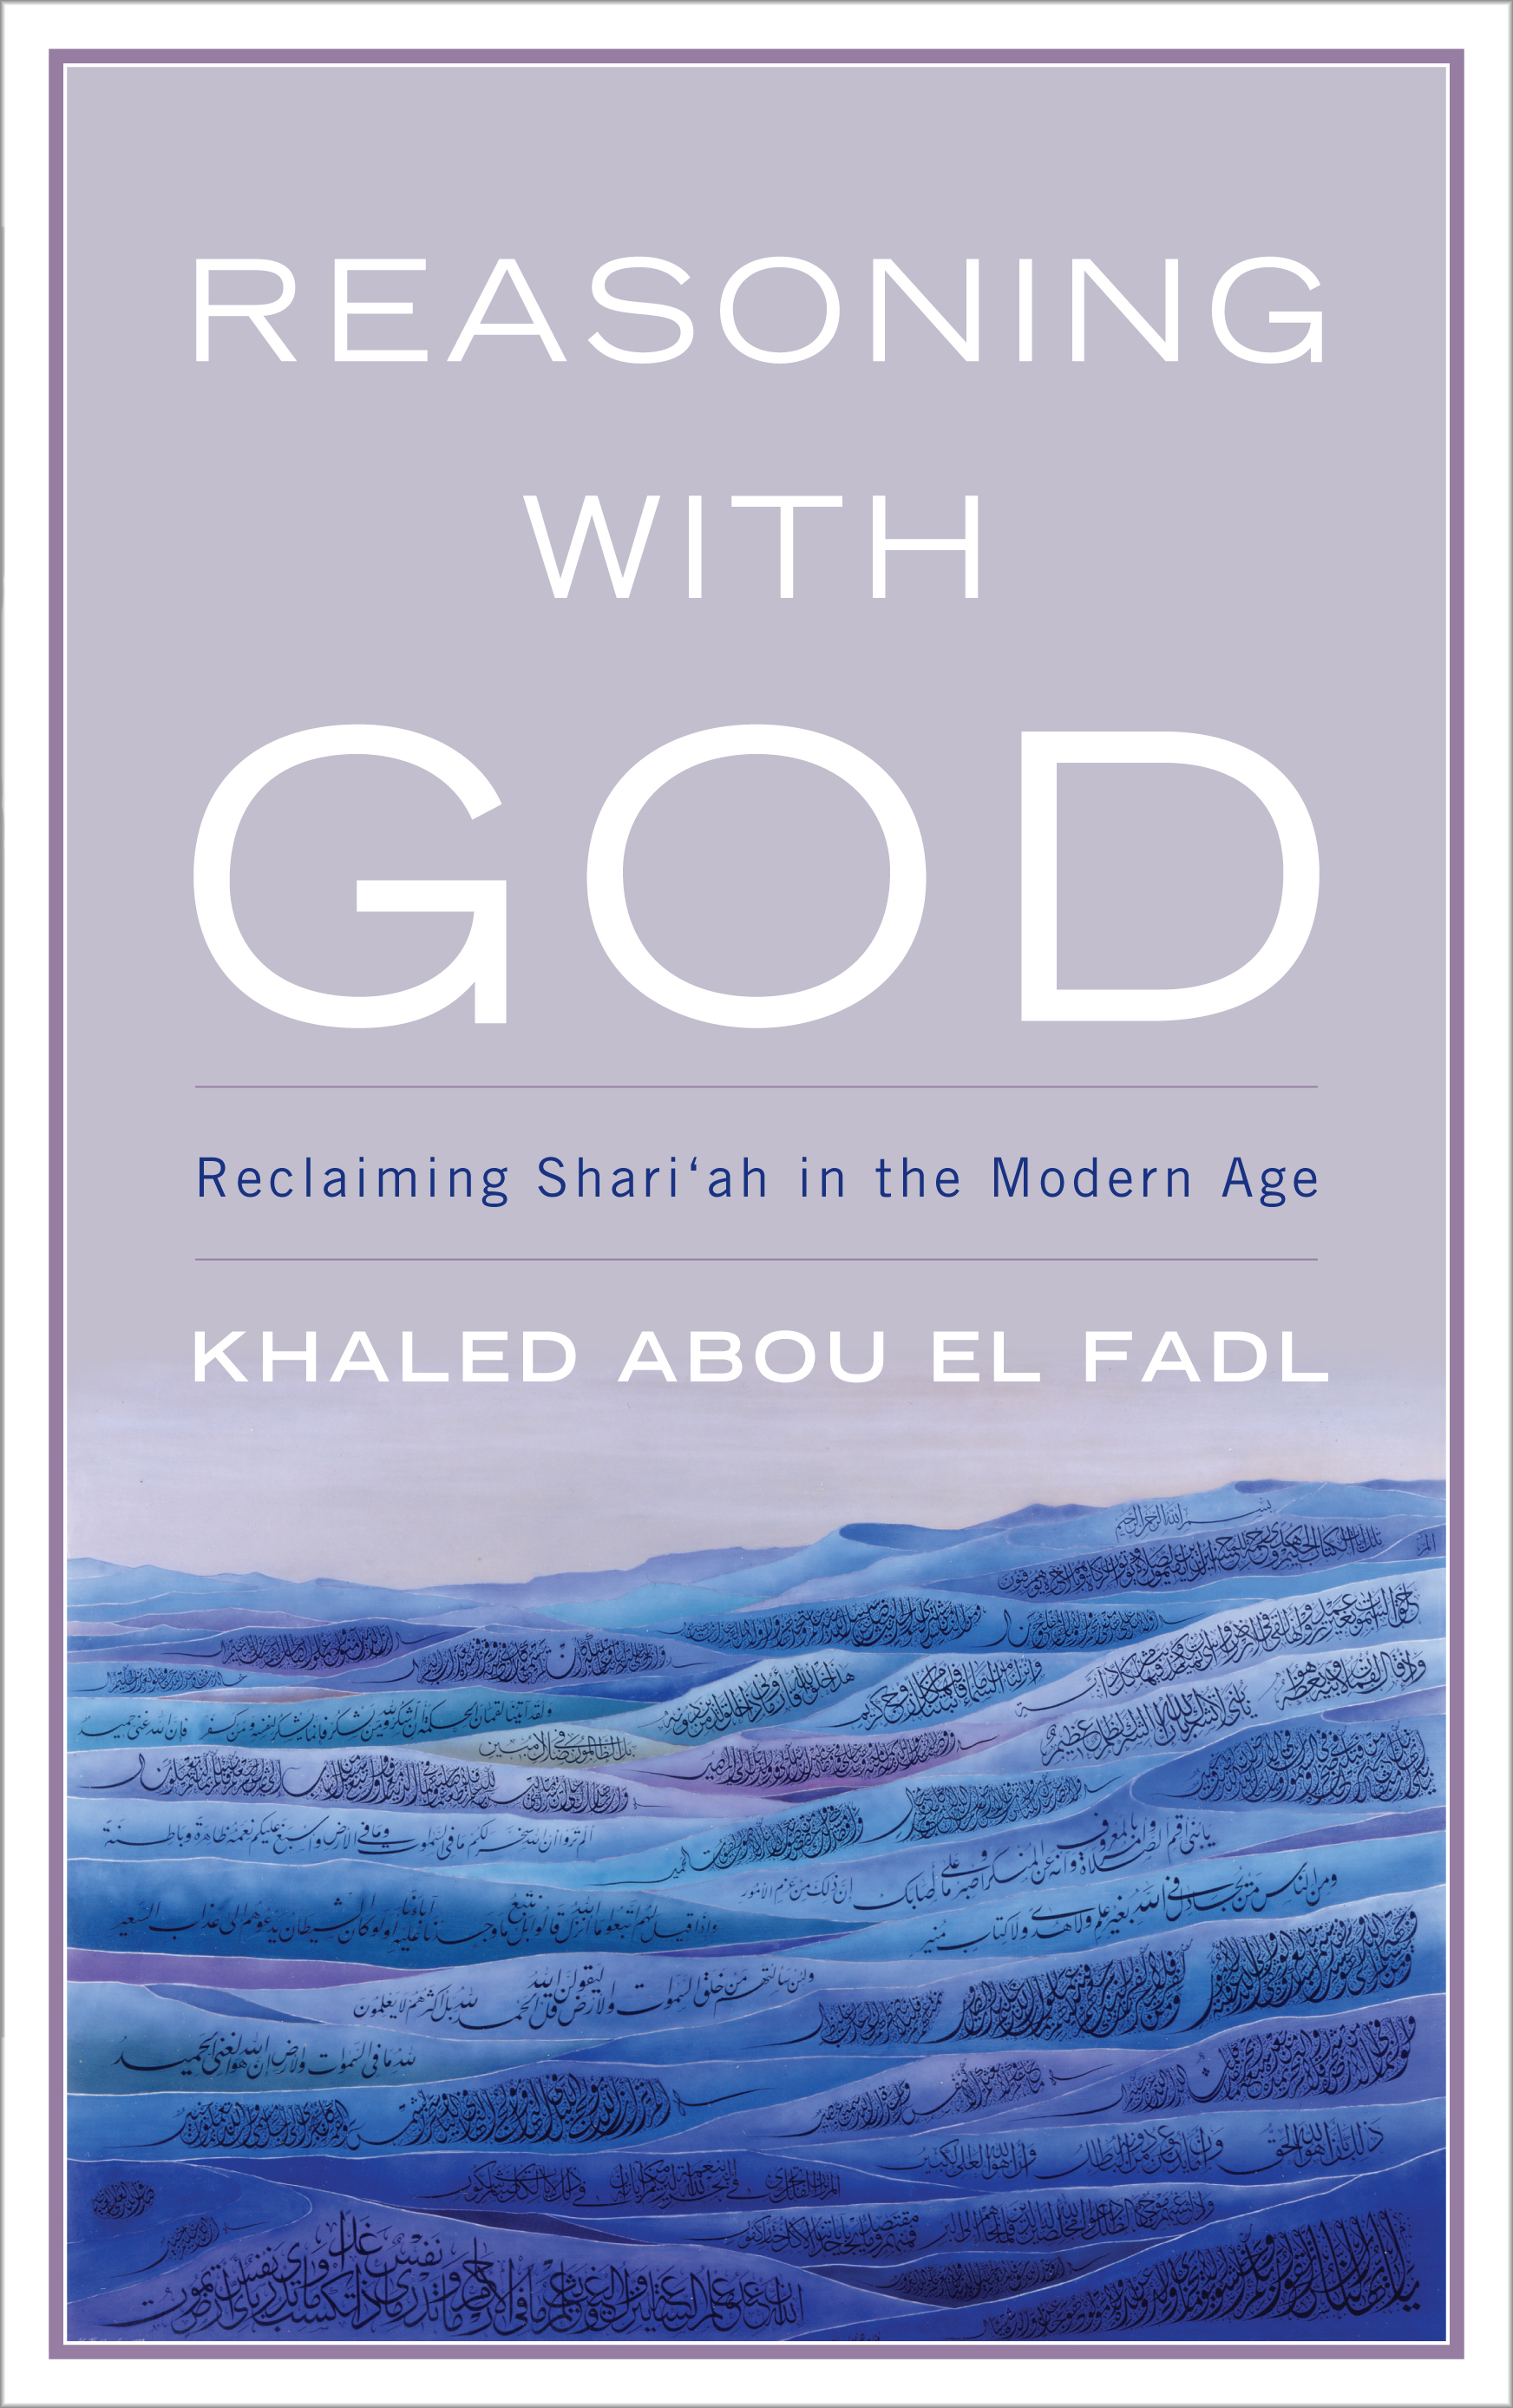 Reasoning with God: Reclaiming Shari‘ah in the Modern Age